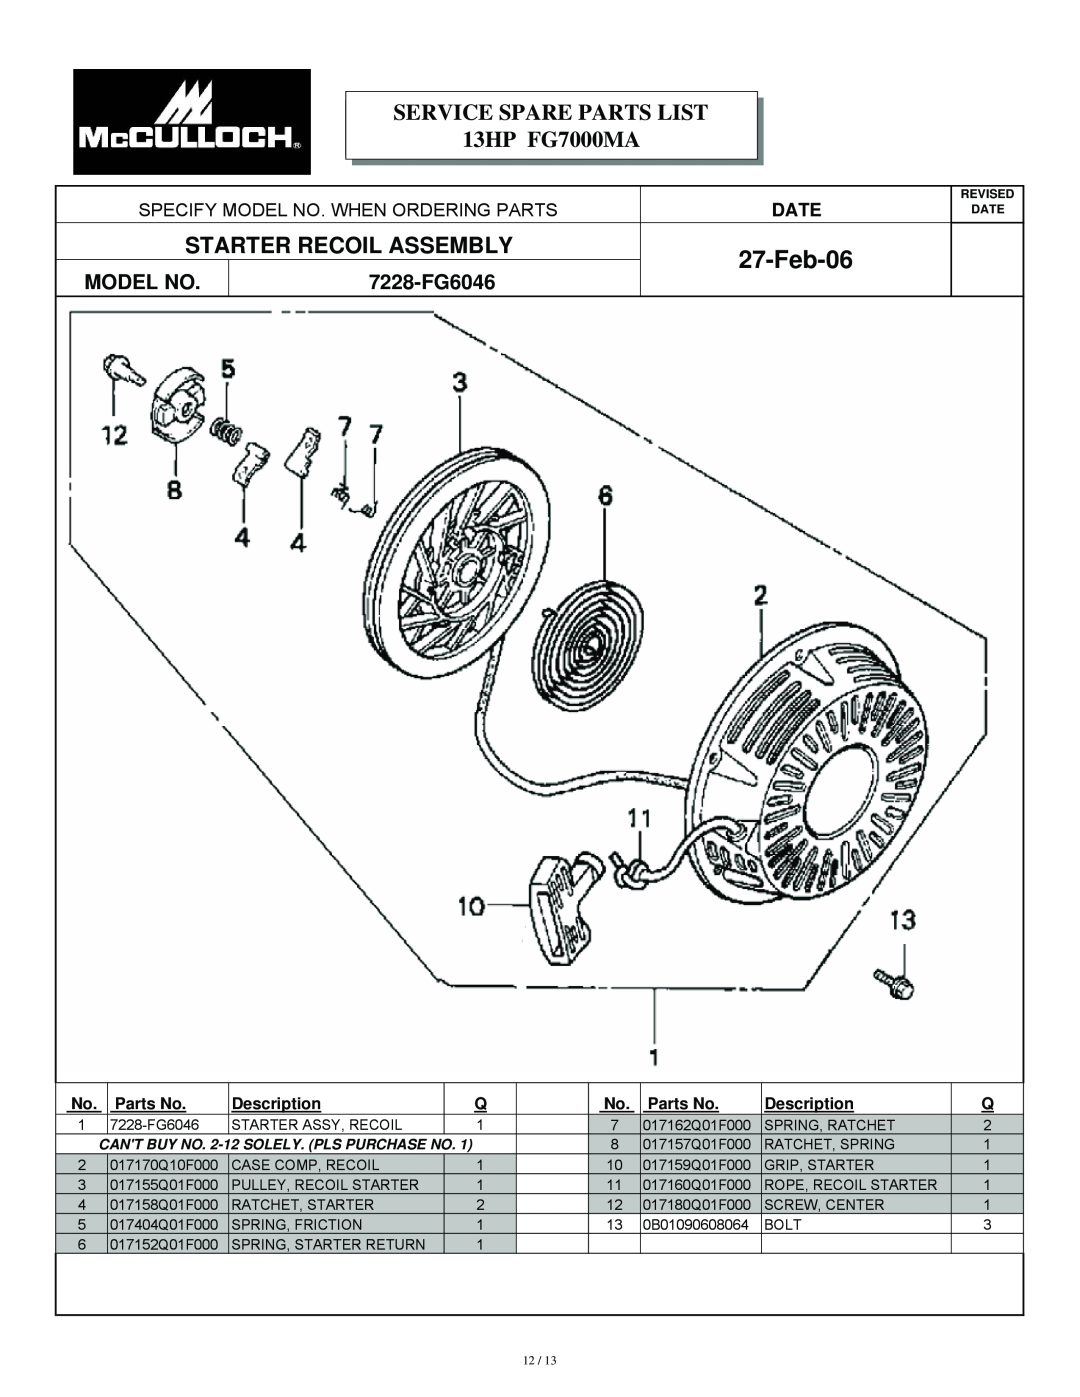 McCulloch 7096-FG7008 Starter Recoil Assembly, 7228-FG6046, Feb-06, Specify Model No. When Ordering Parts, Date 